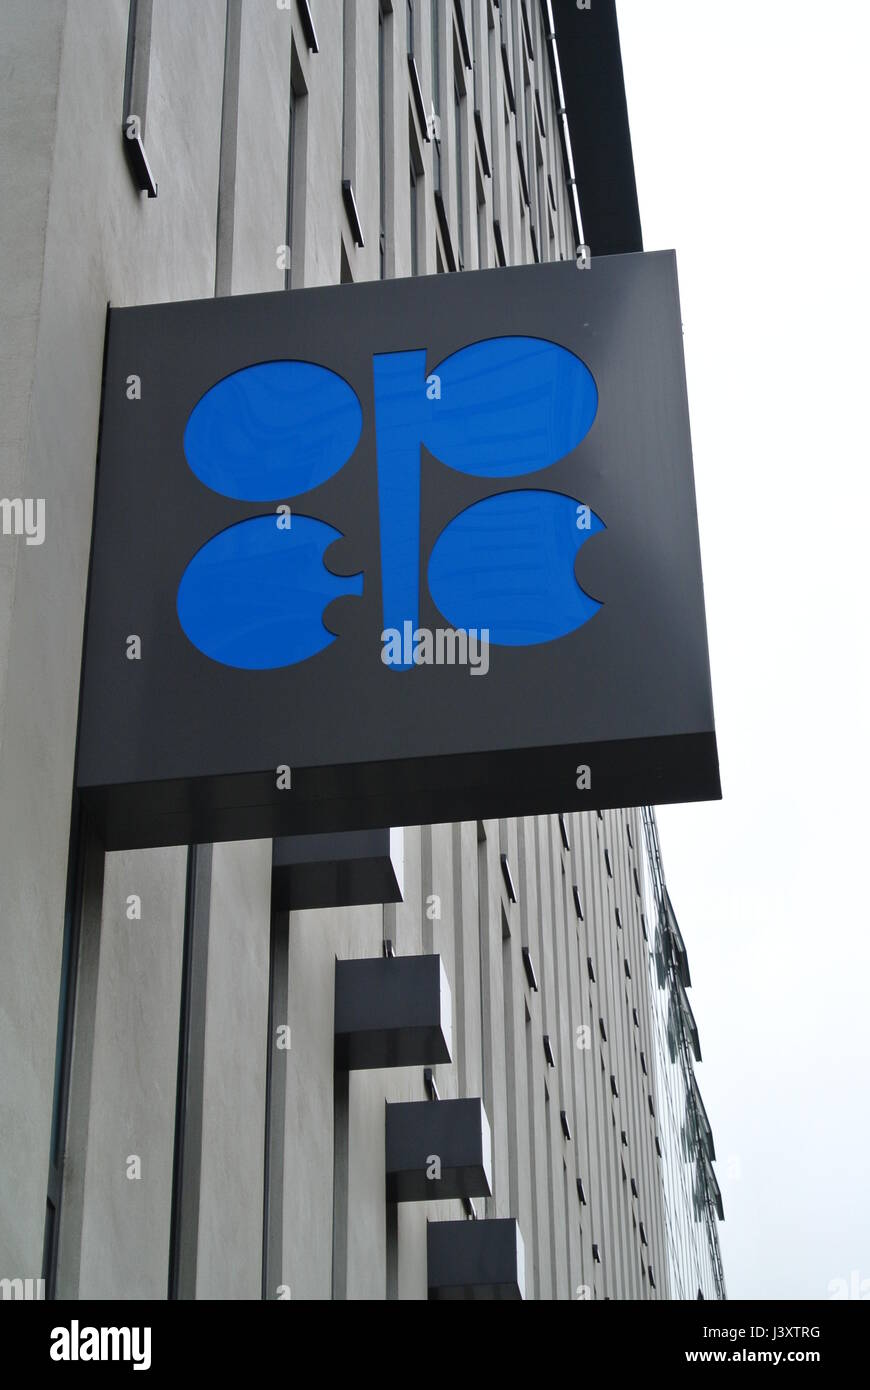 OPEC sign outside the headquarters of Organization of the Petroleum Exporting Countries, Vienna, Austria, Europe Stock Photo